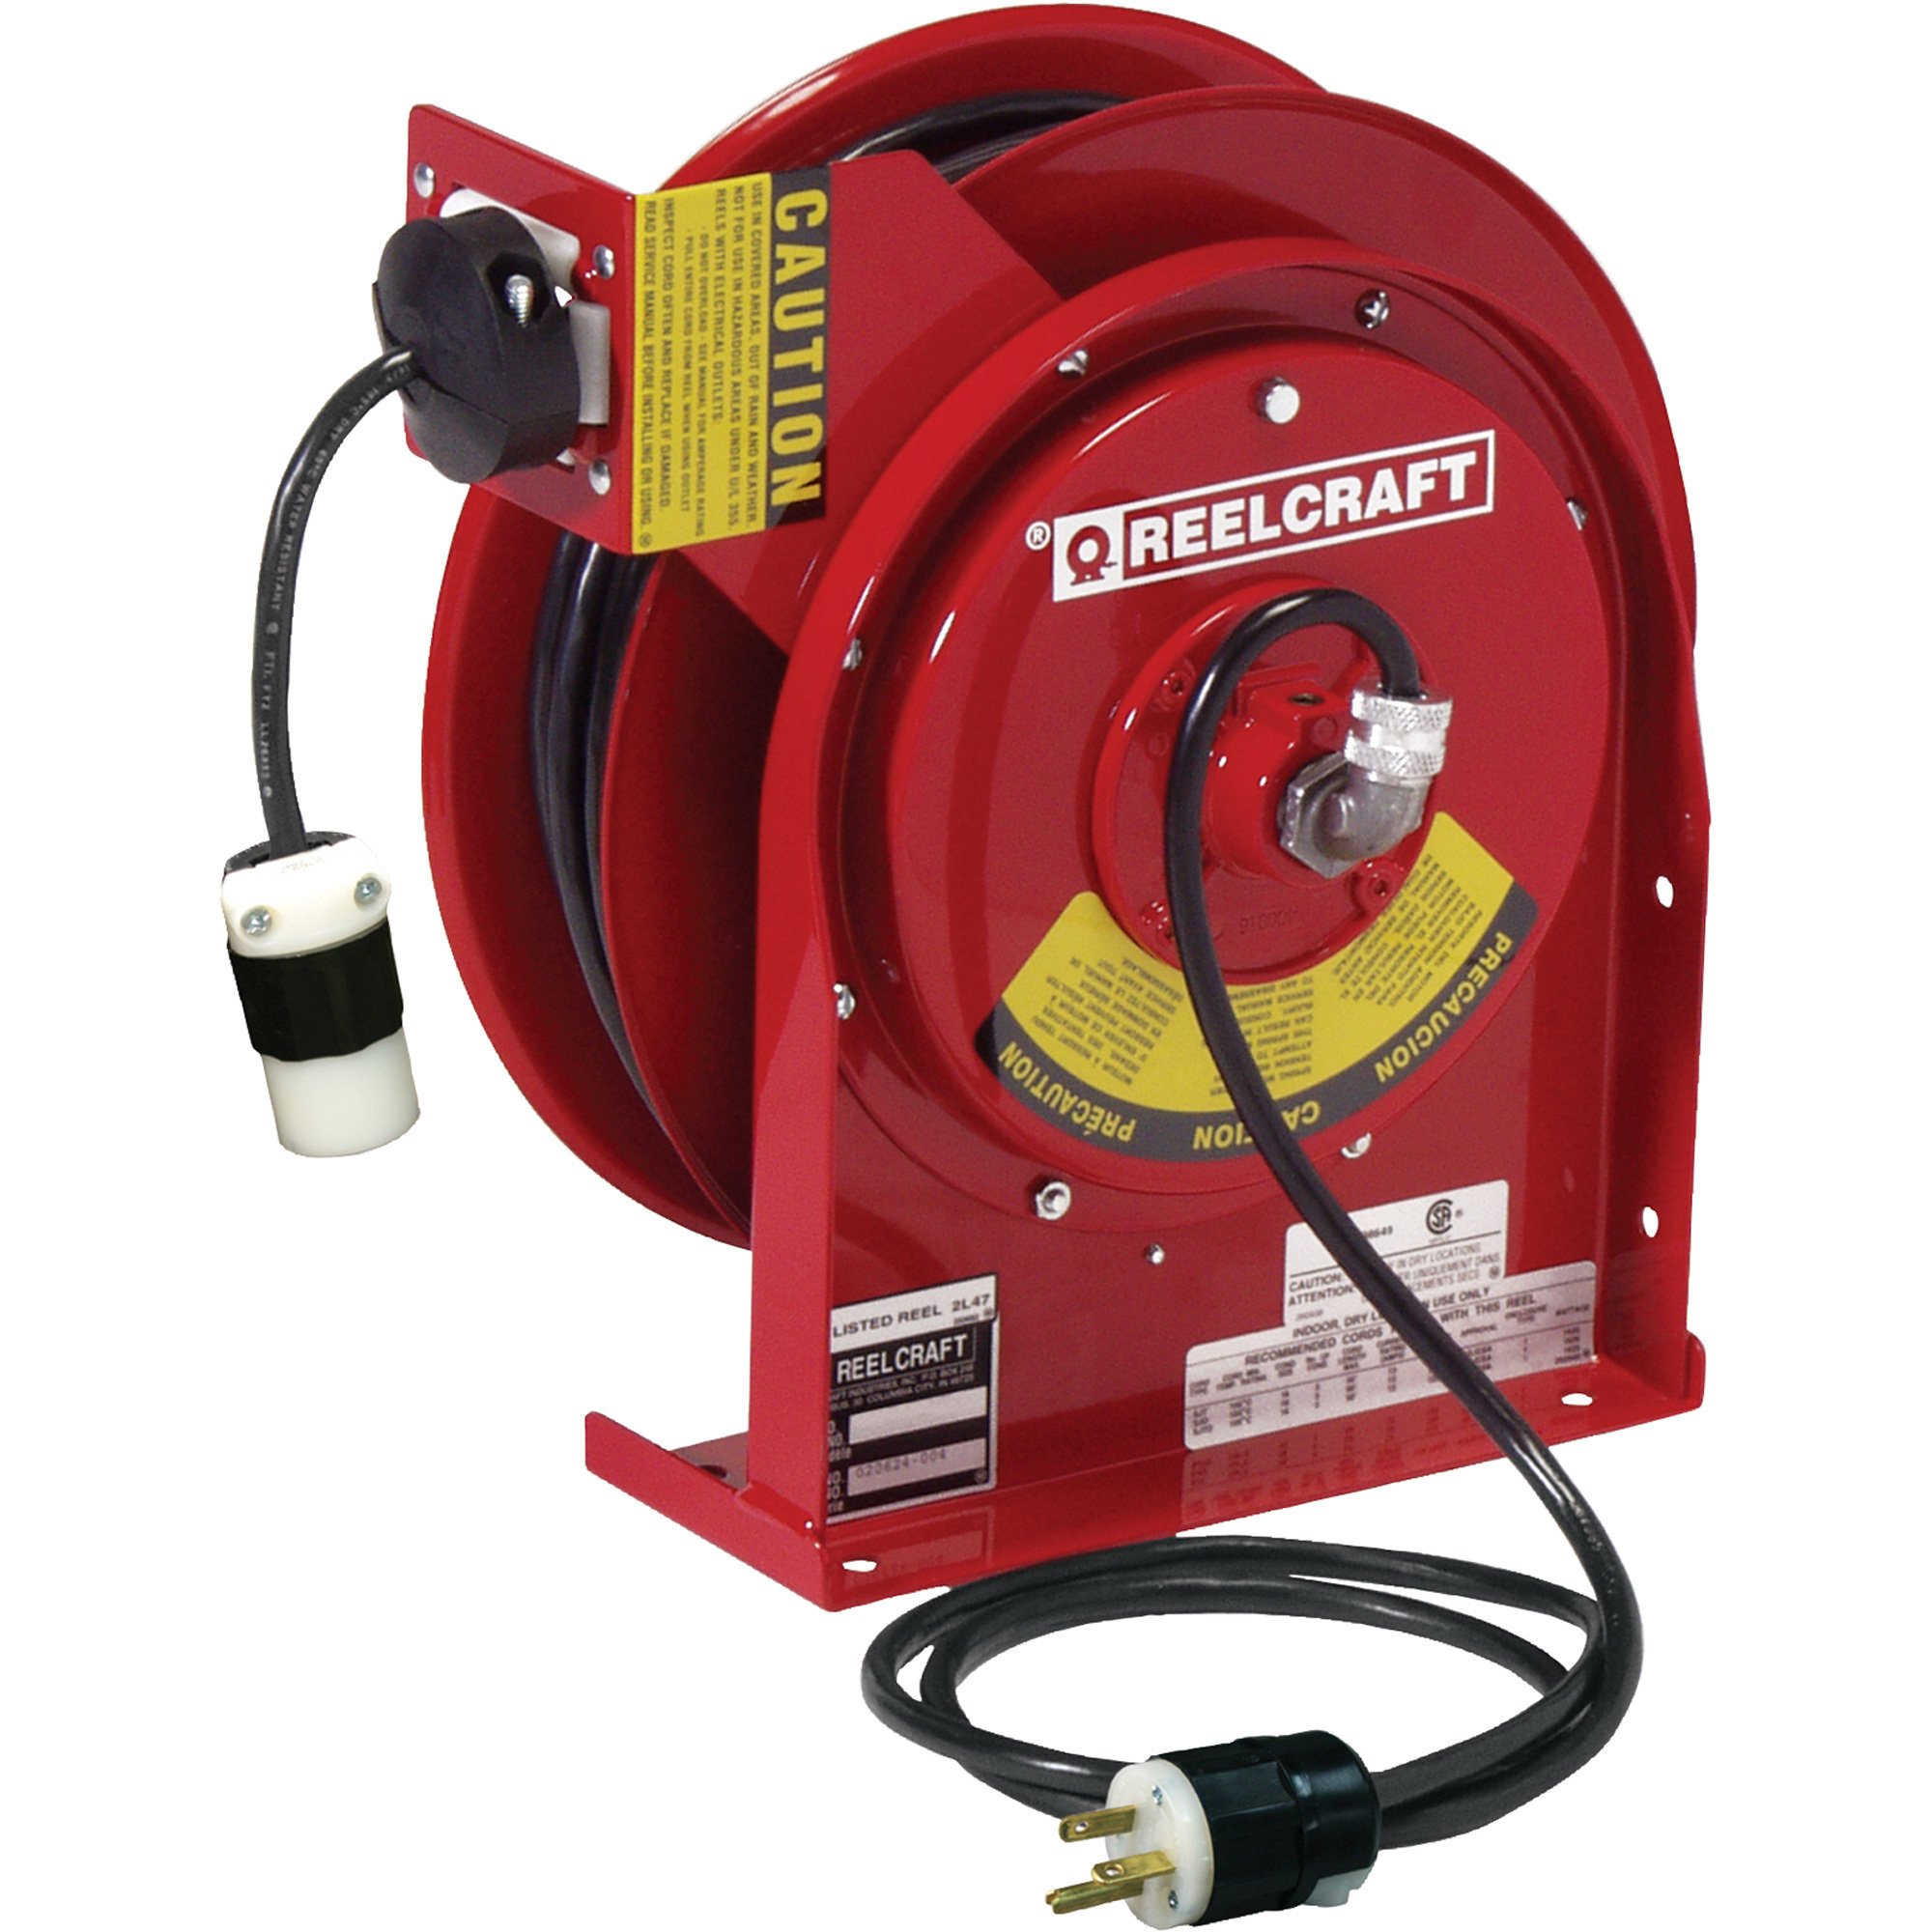 Reelcraft Retractable Cord Reel with Outlet — 45ft., 12/3, 20 Amps, Model#  L 4545 123 3A